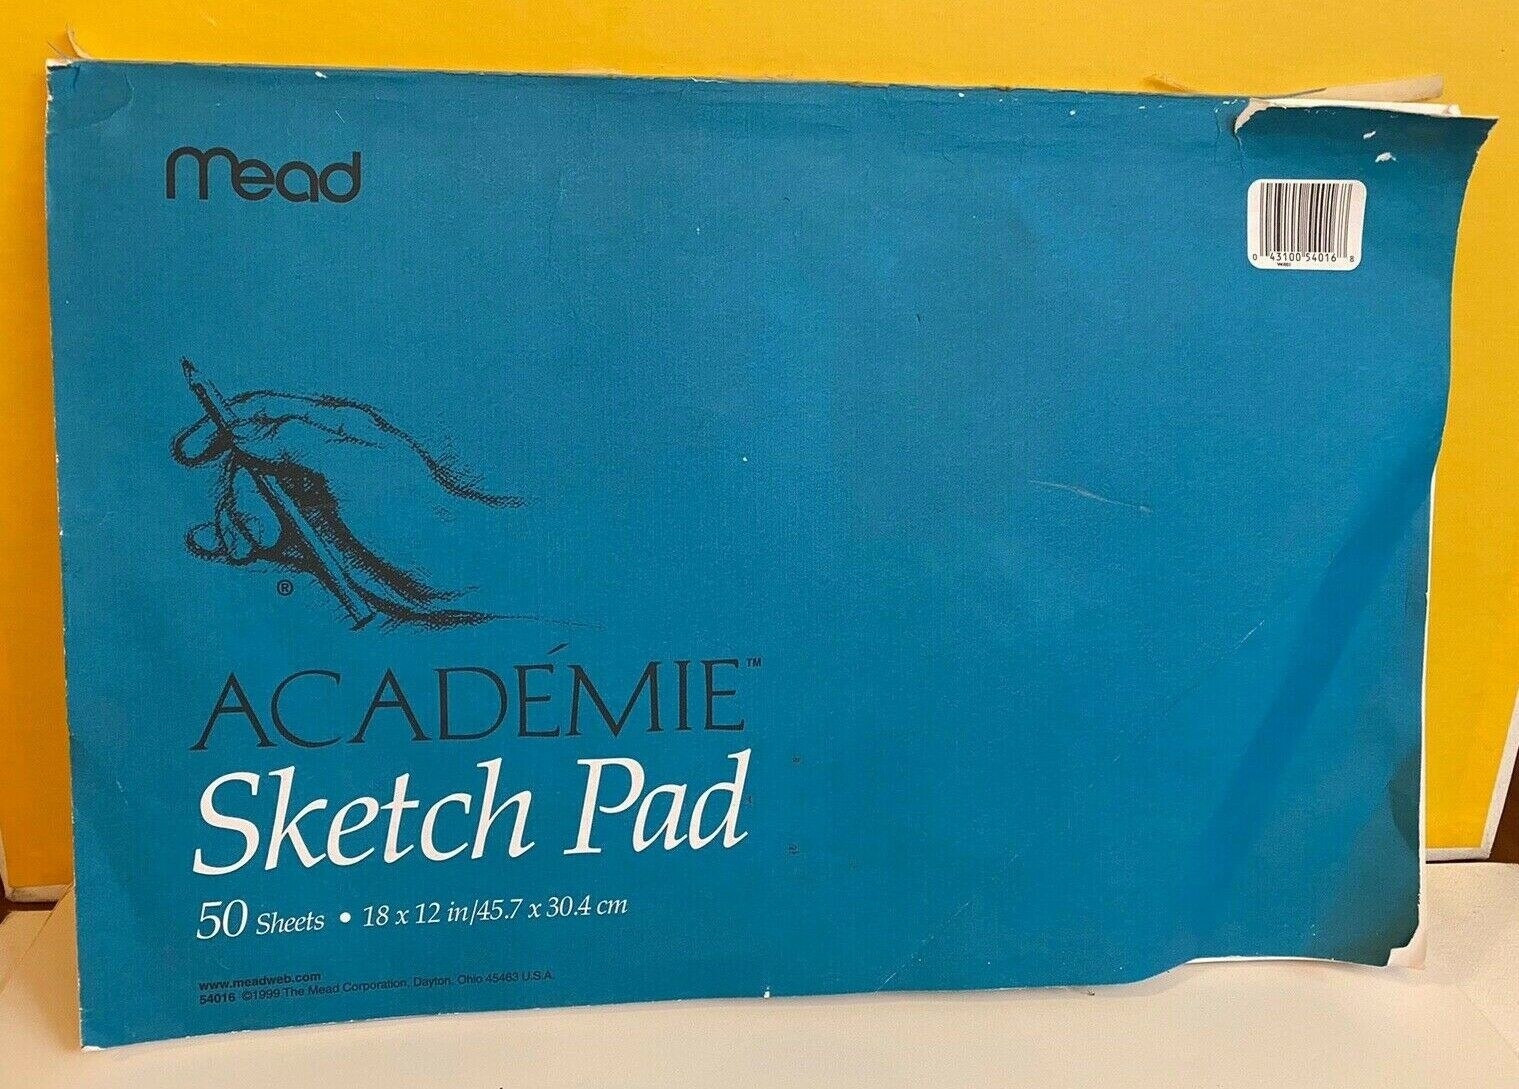 Mead’s Académie Sketch Pad with a teal blue cover that features a sketch of a hand holding a pencil.